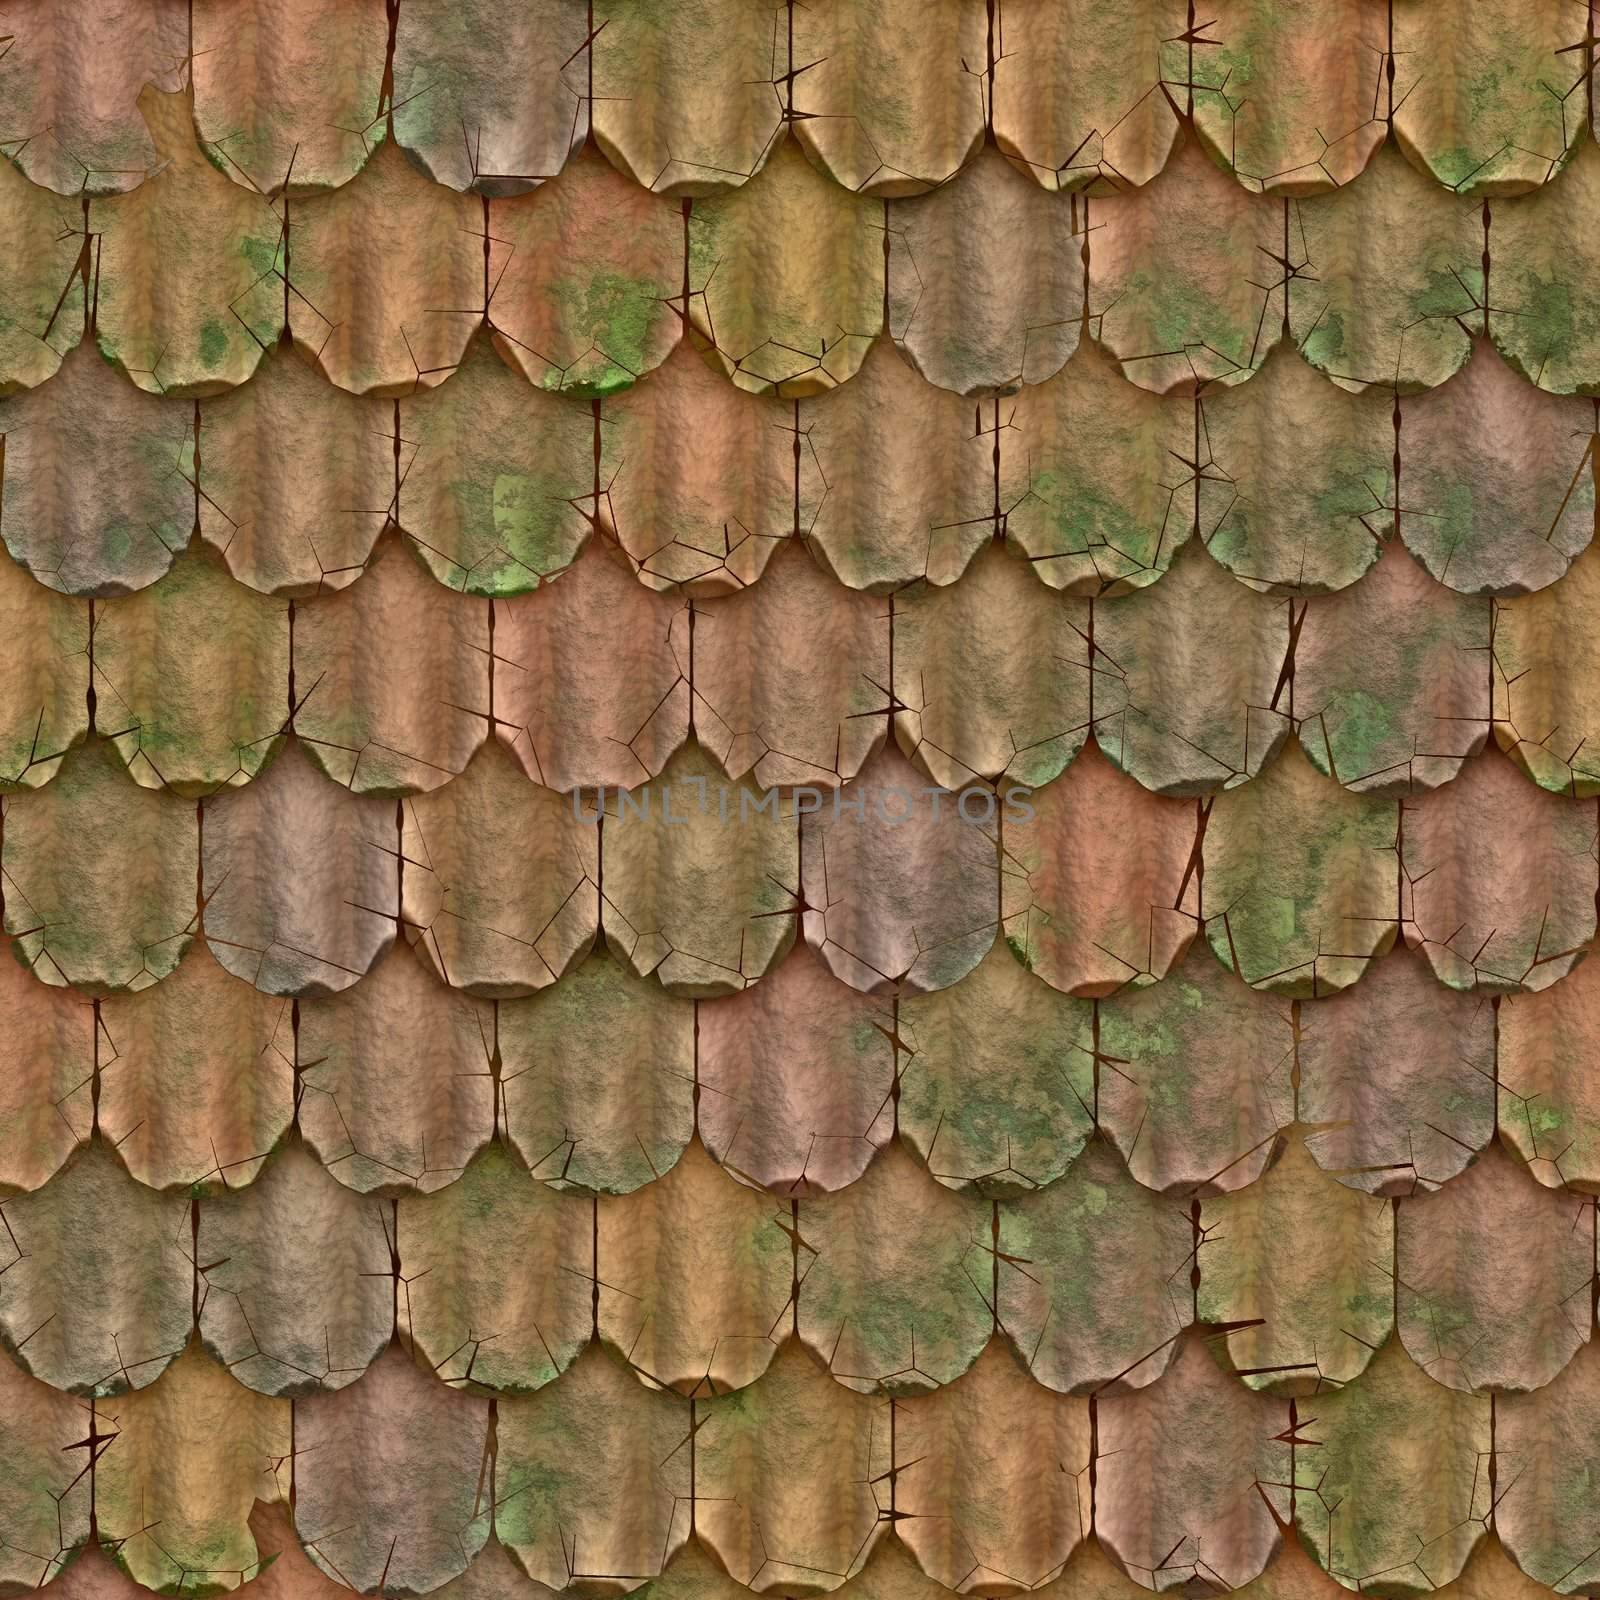 roof tiles by clearviewstock